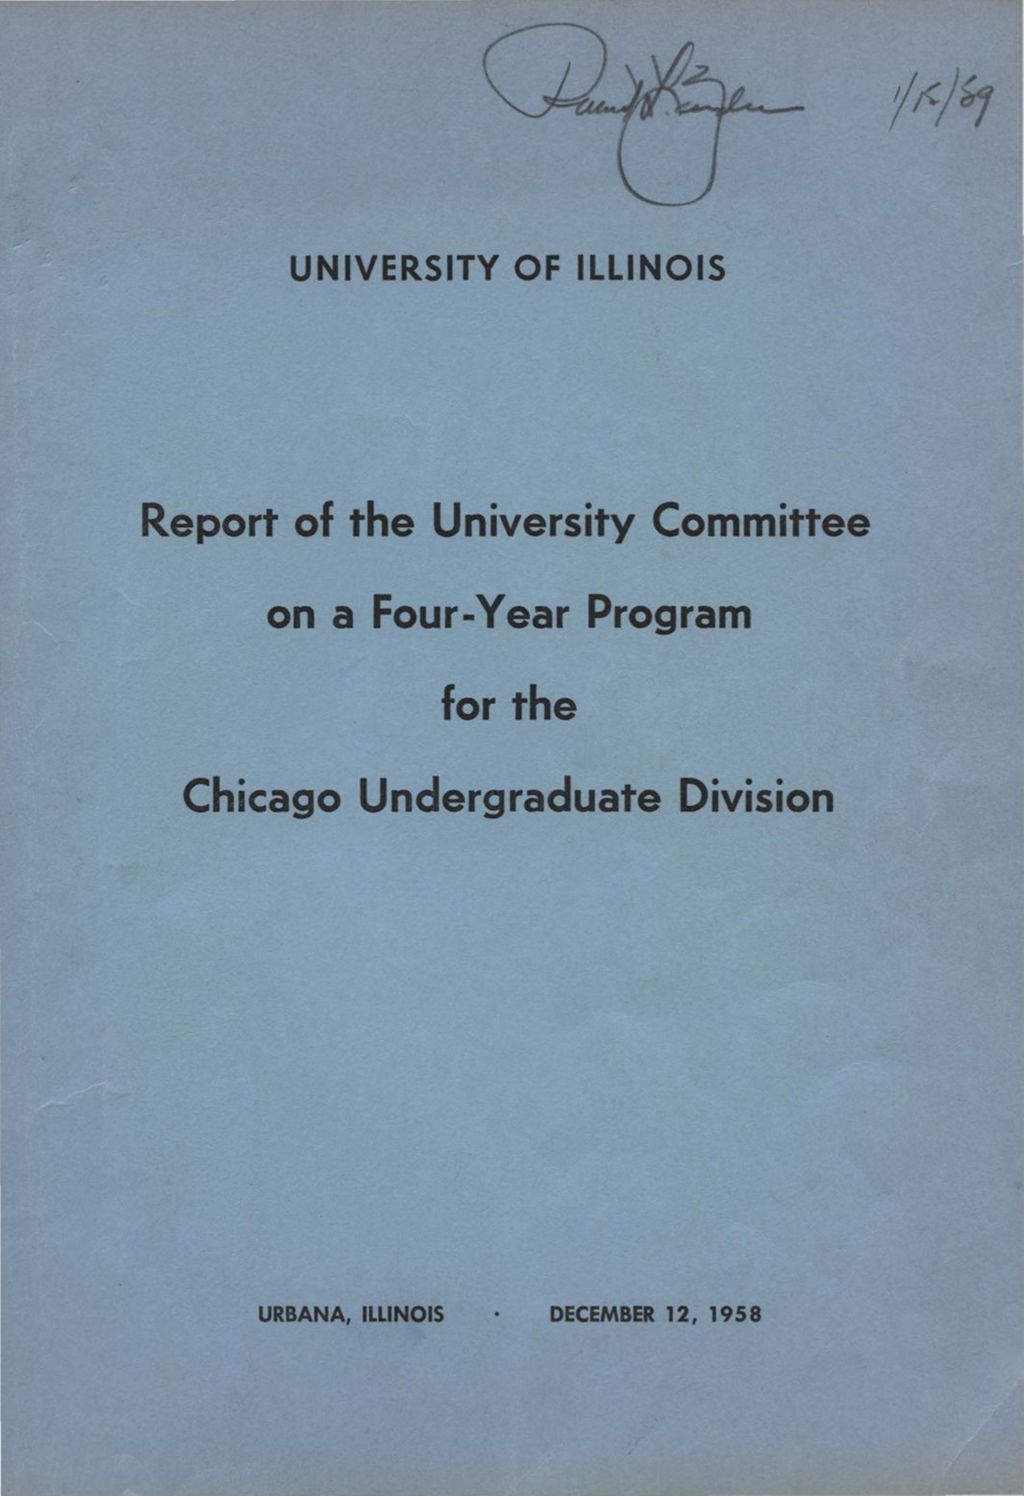 Miniature of Report of the University Committee on a Four-Year Program for the Chicago Undergraduate Division. Urbana, Illinois